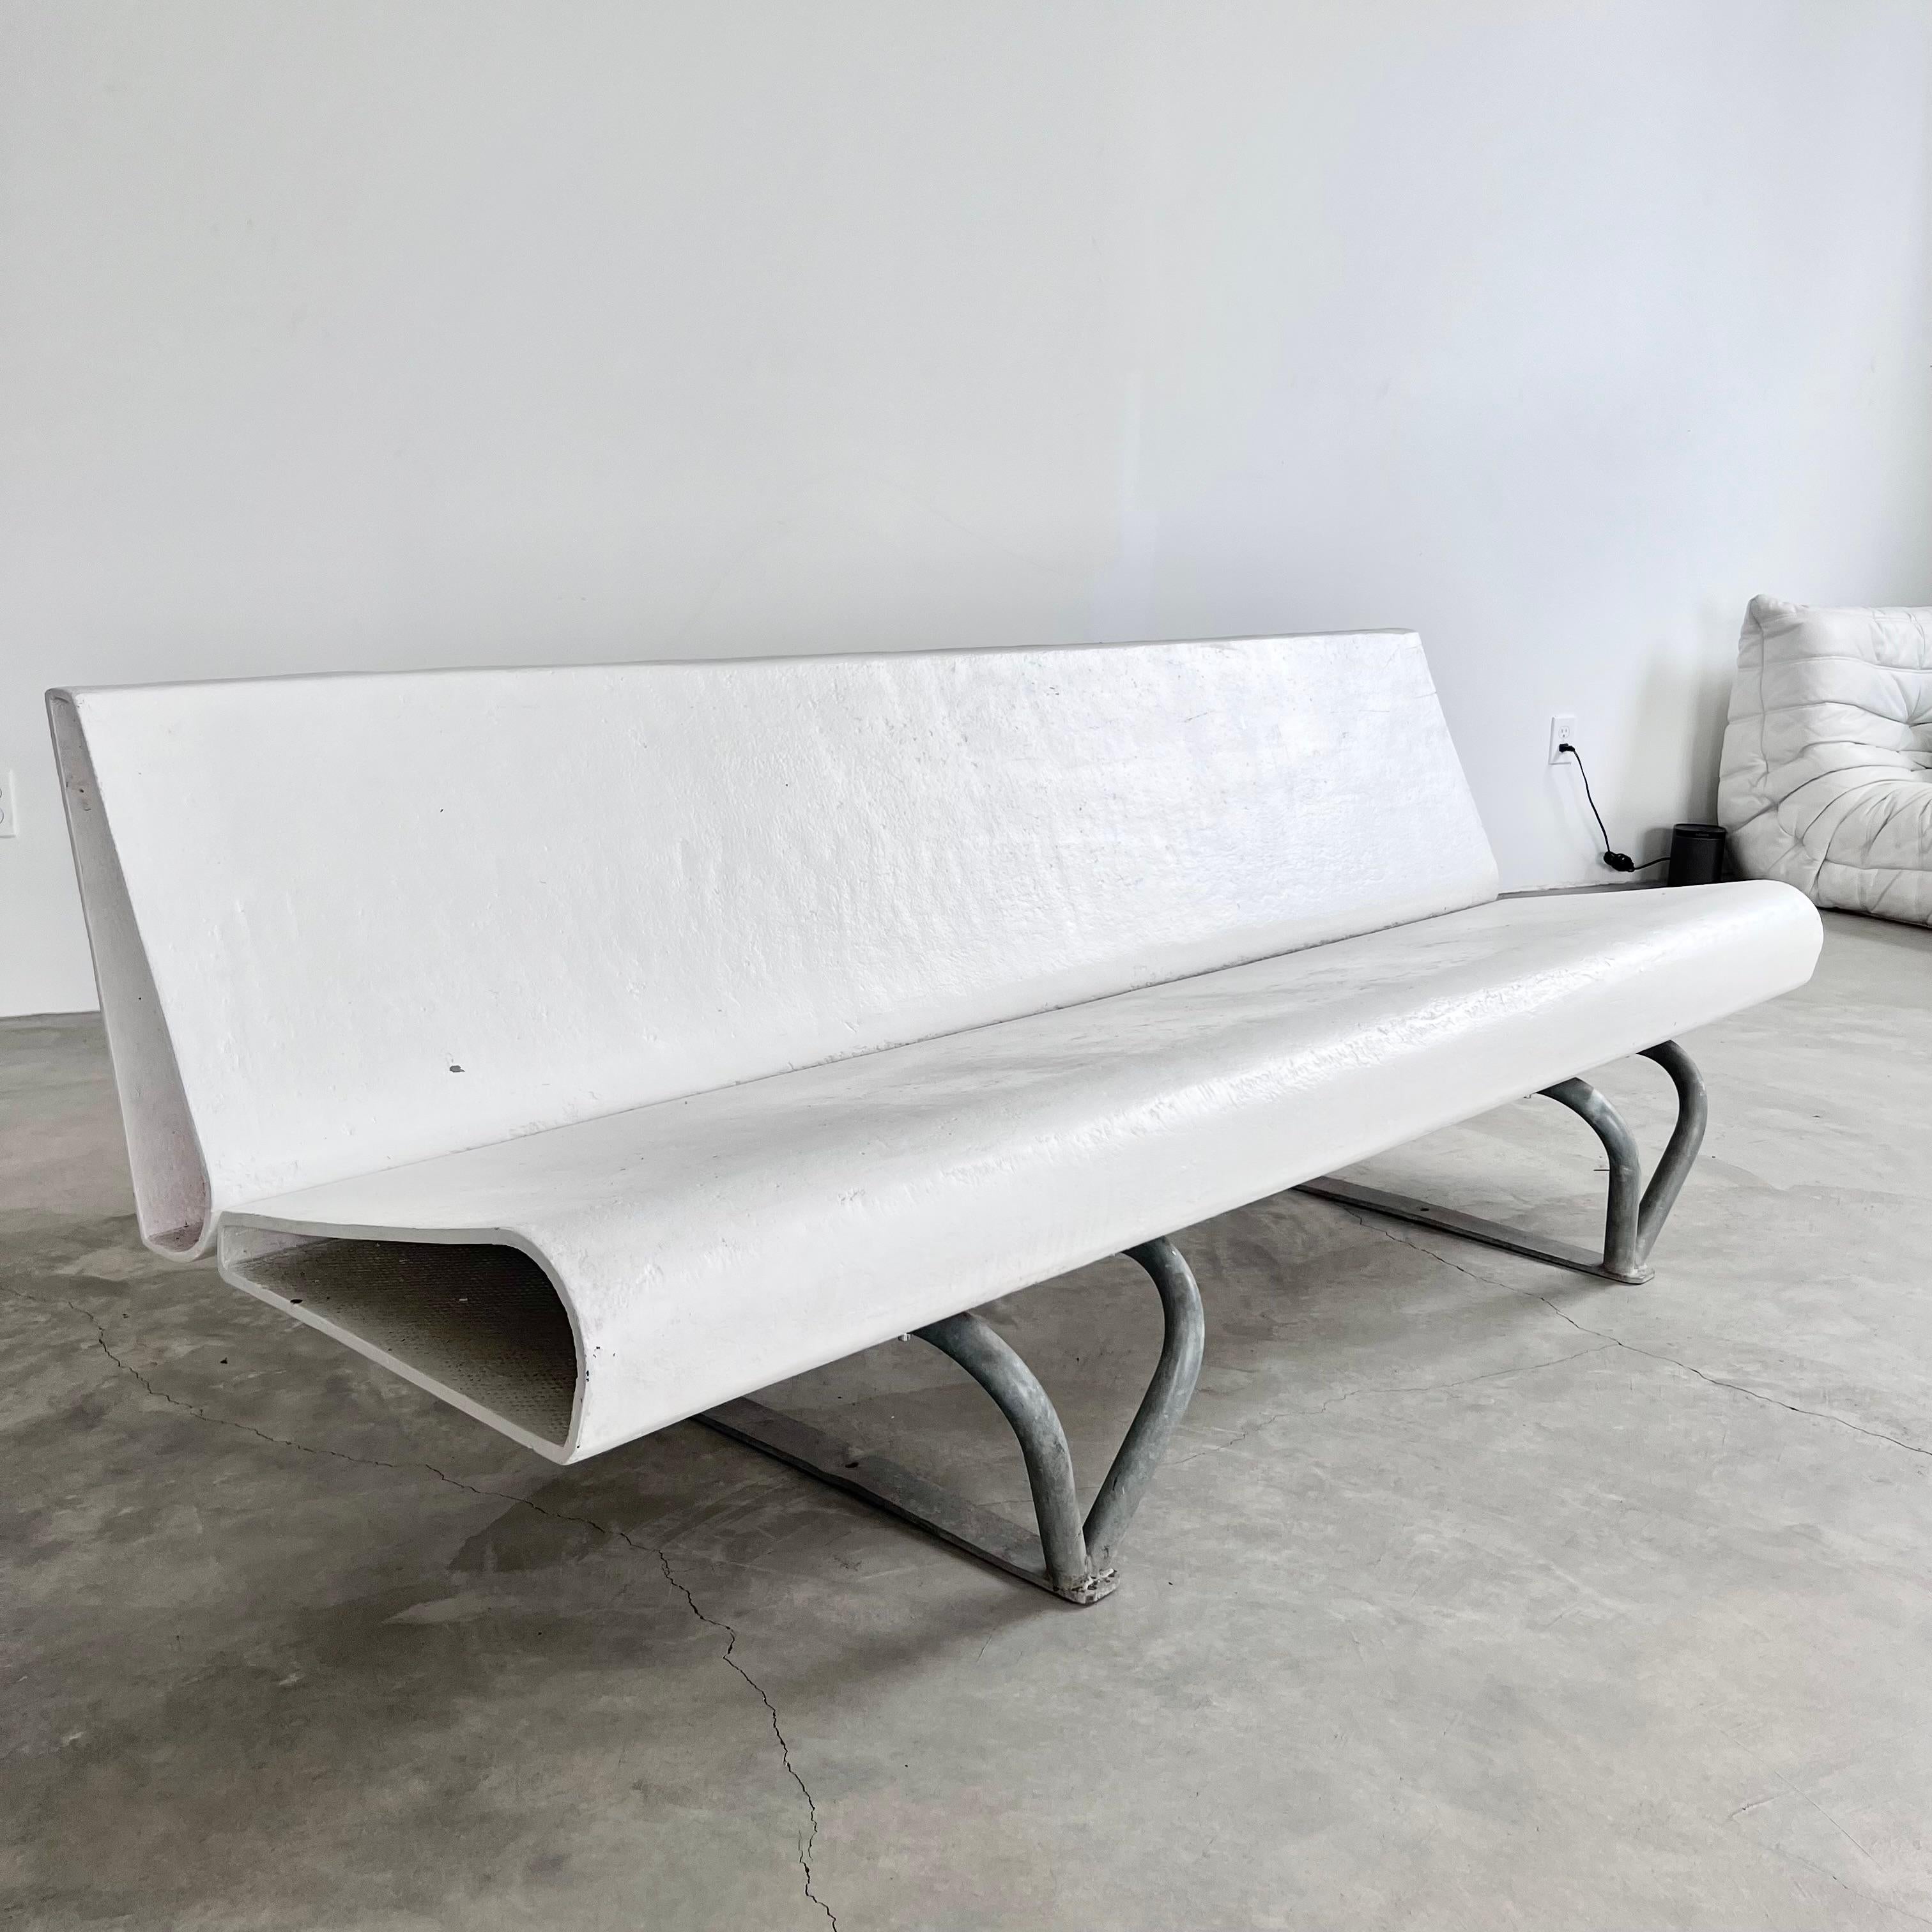 Mid-20th Century Willy Guhl Concrete and Steel Ribbon Bench, 1960s Switzerland